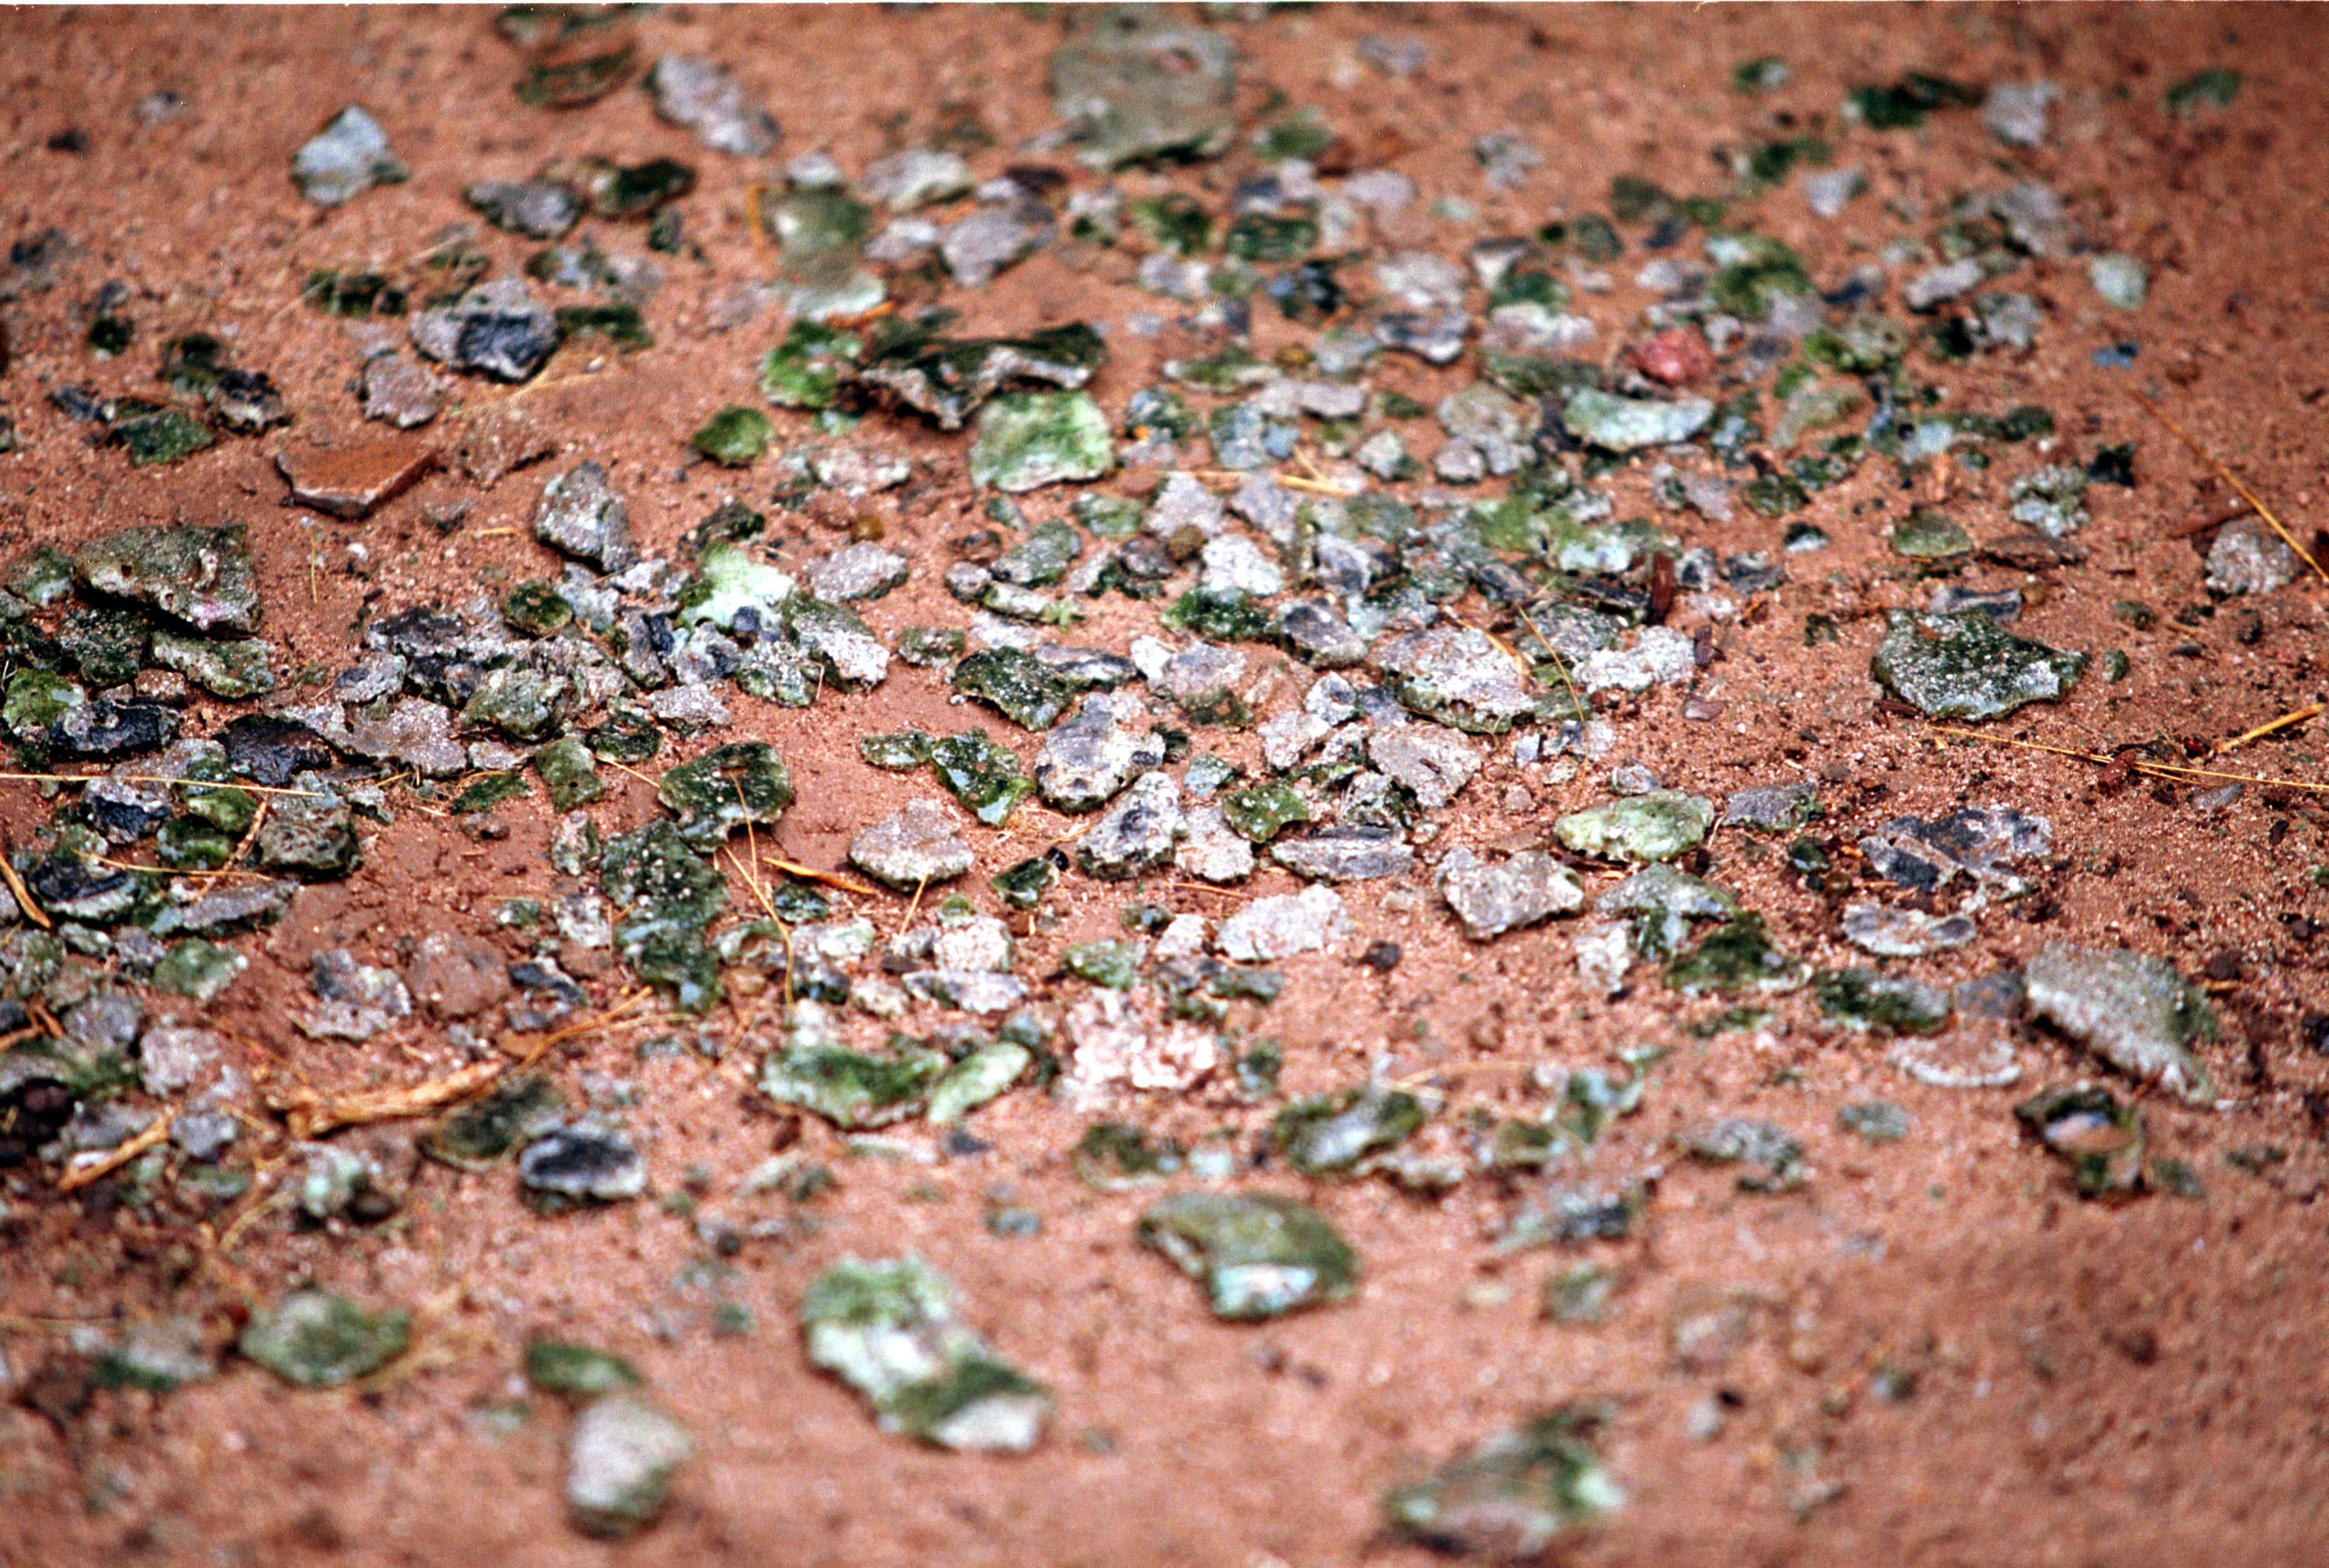 Trinitite, the green, glassy substance at The Trinity Site, scattered at ground zero.